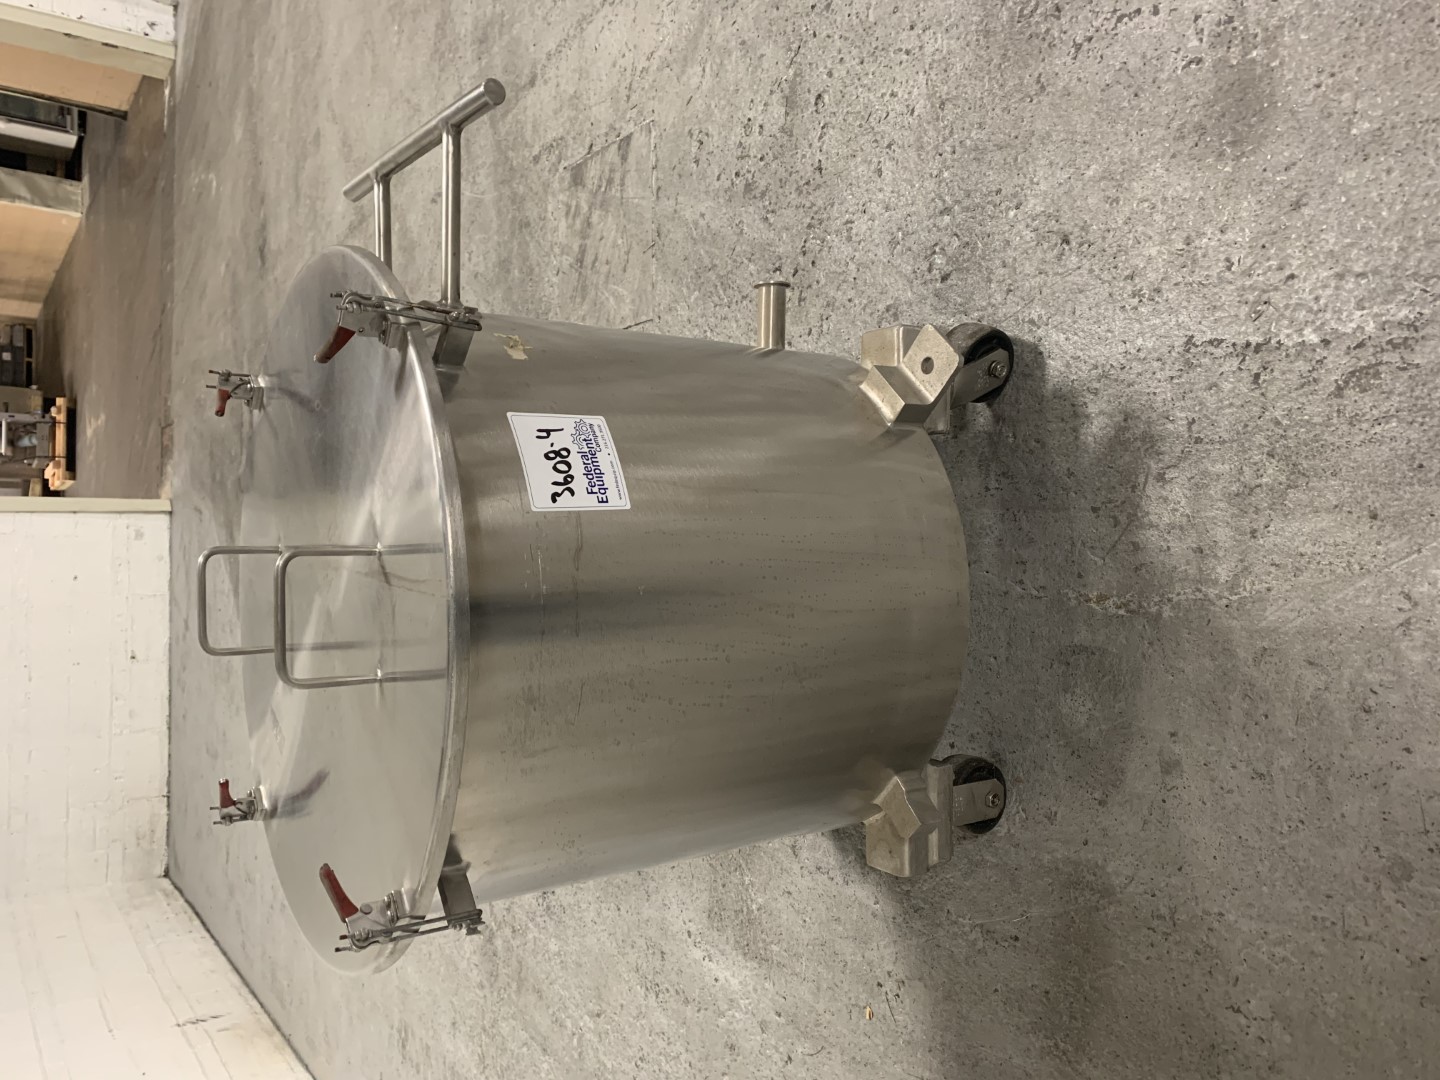 40 Gal Ross Mixing Can, S/S